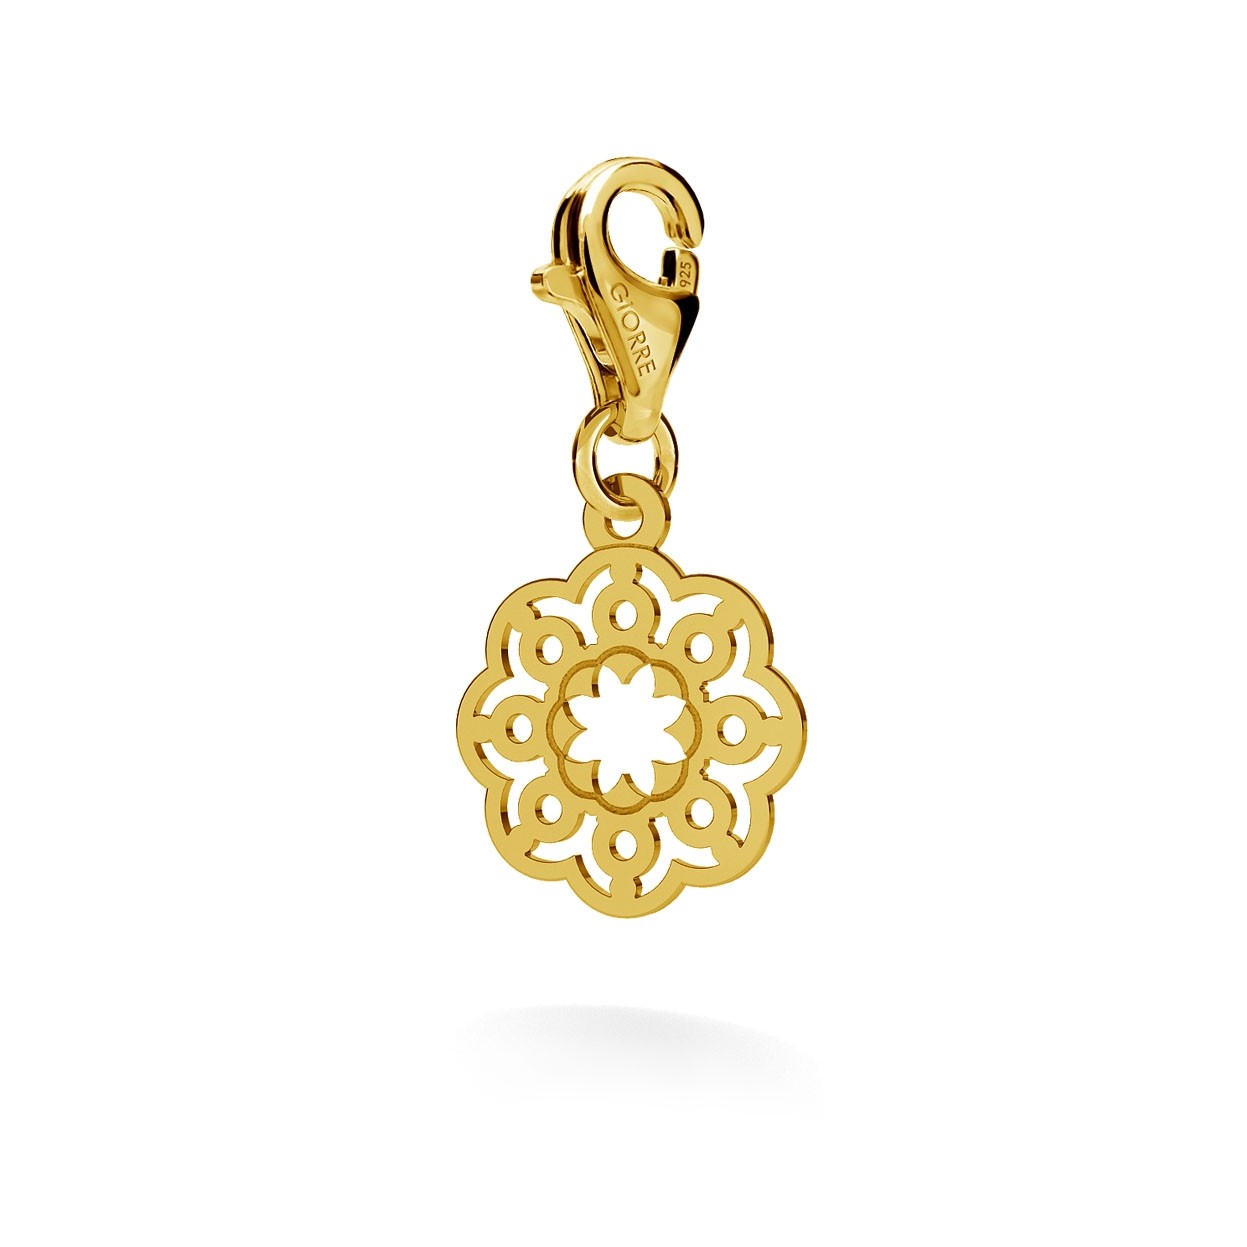 CHARM 58, SMALL OPENWORK, SILVER 925, RHODIUM OR GOLD PLATED